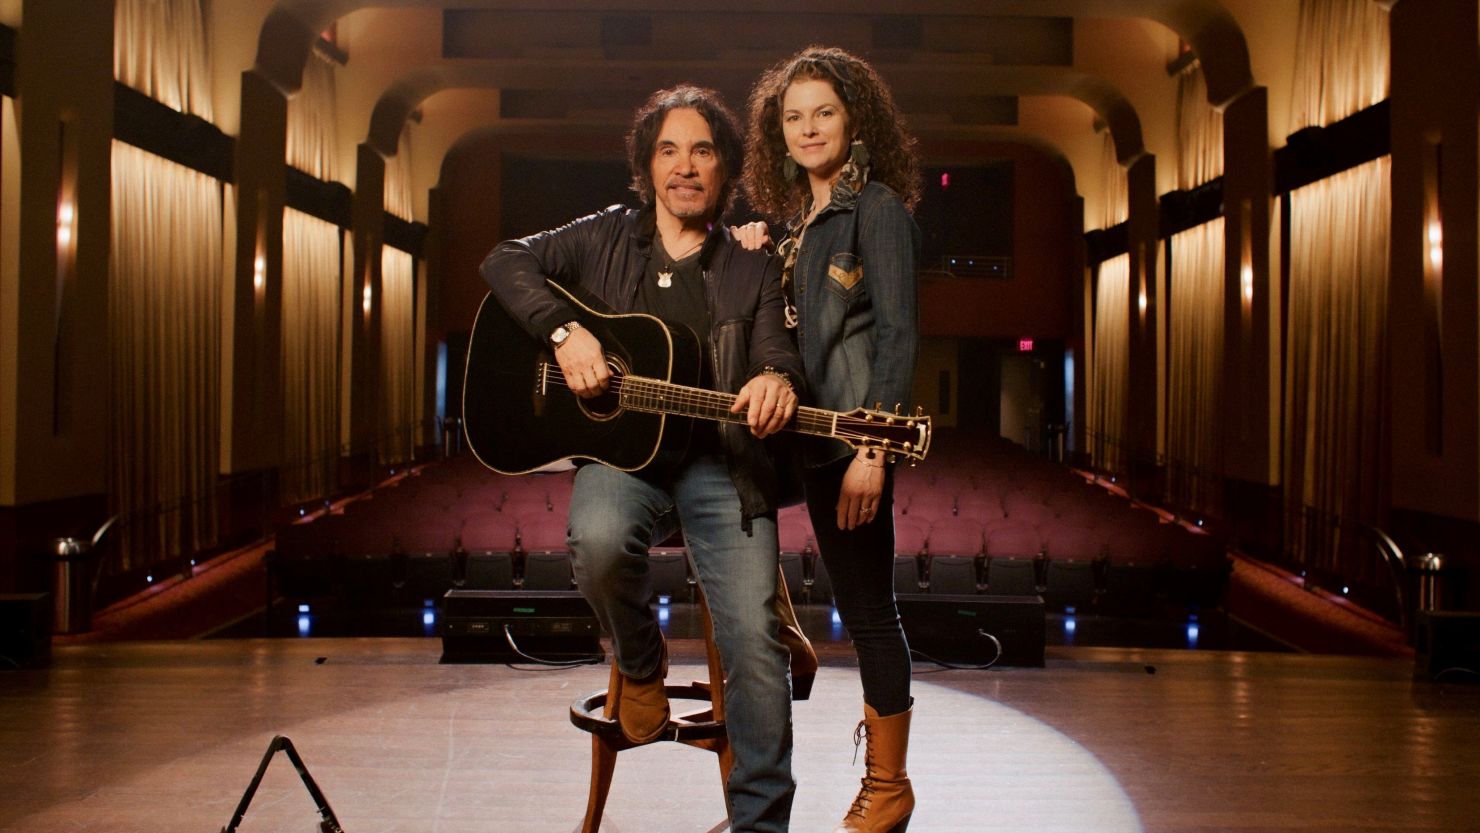 John and Aimee Oates are presenting Oates Songfest 7908 on March 20, 2021, to raise funds for Feeding America.